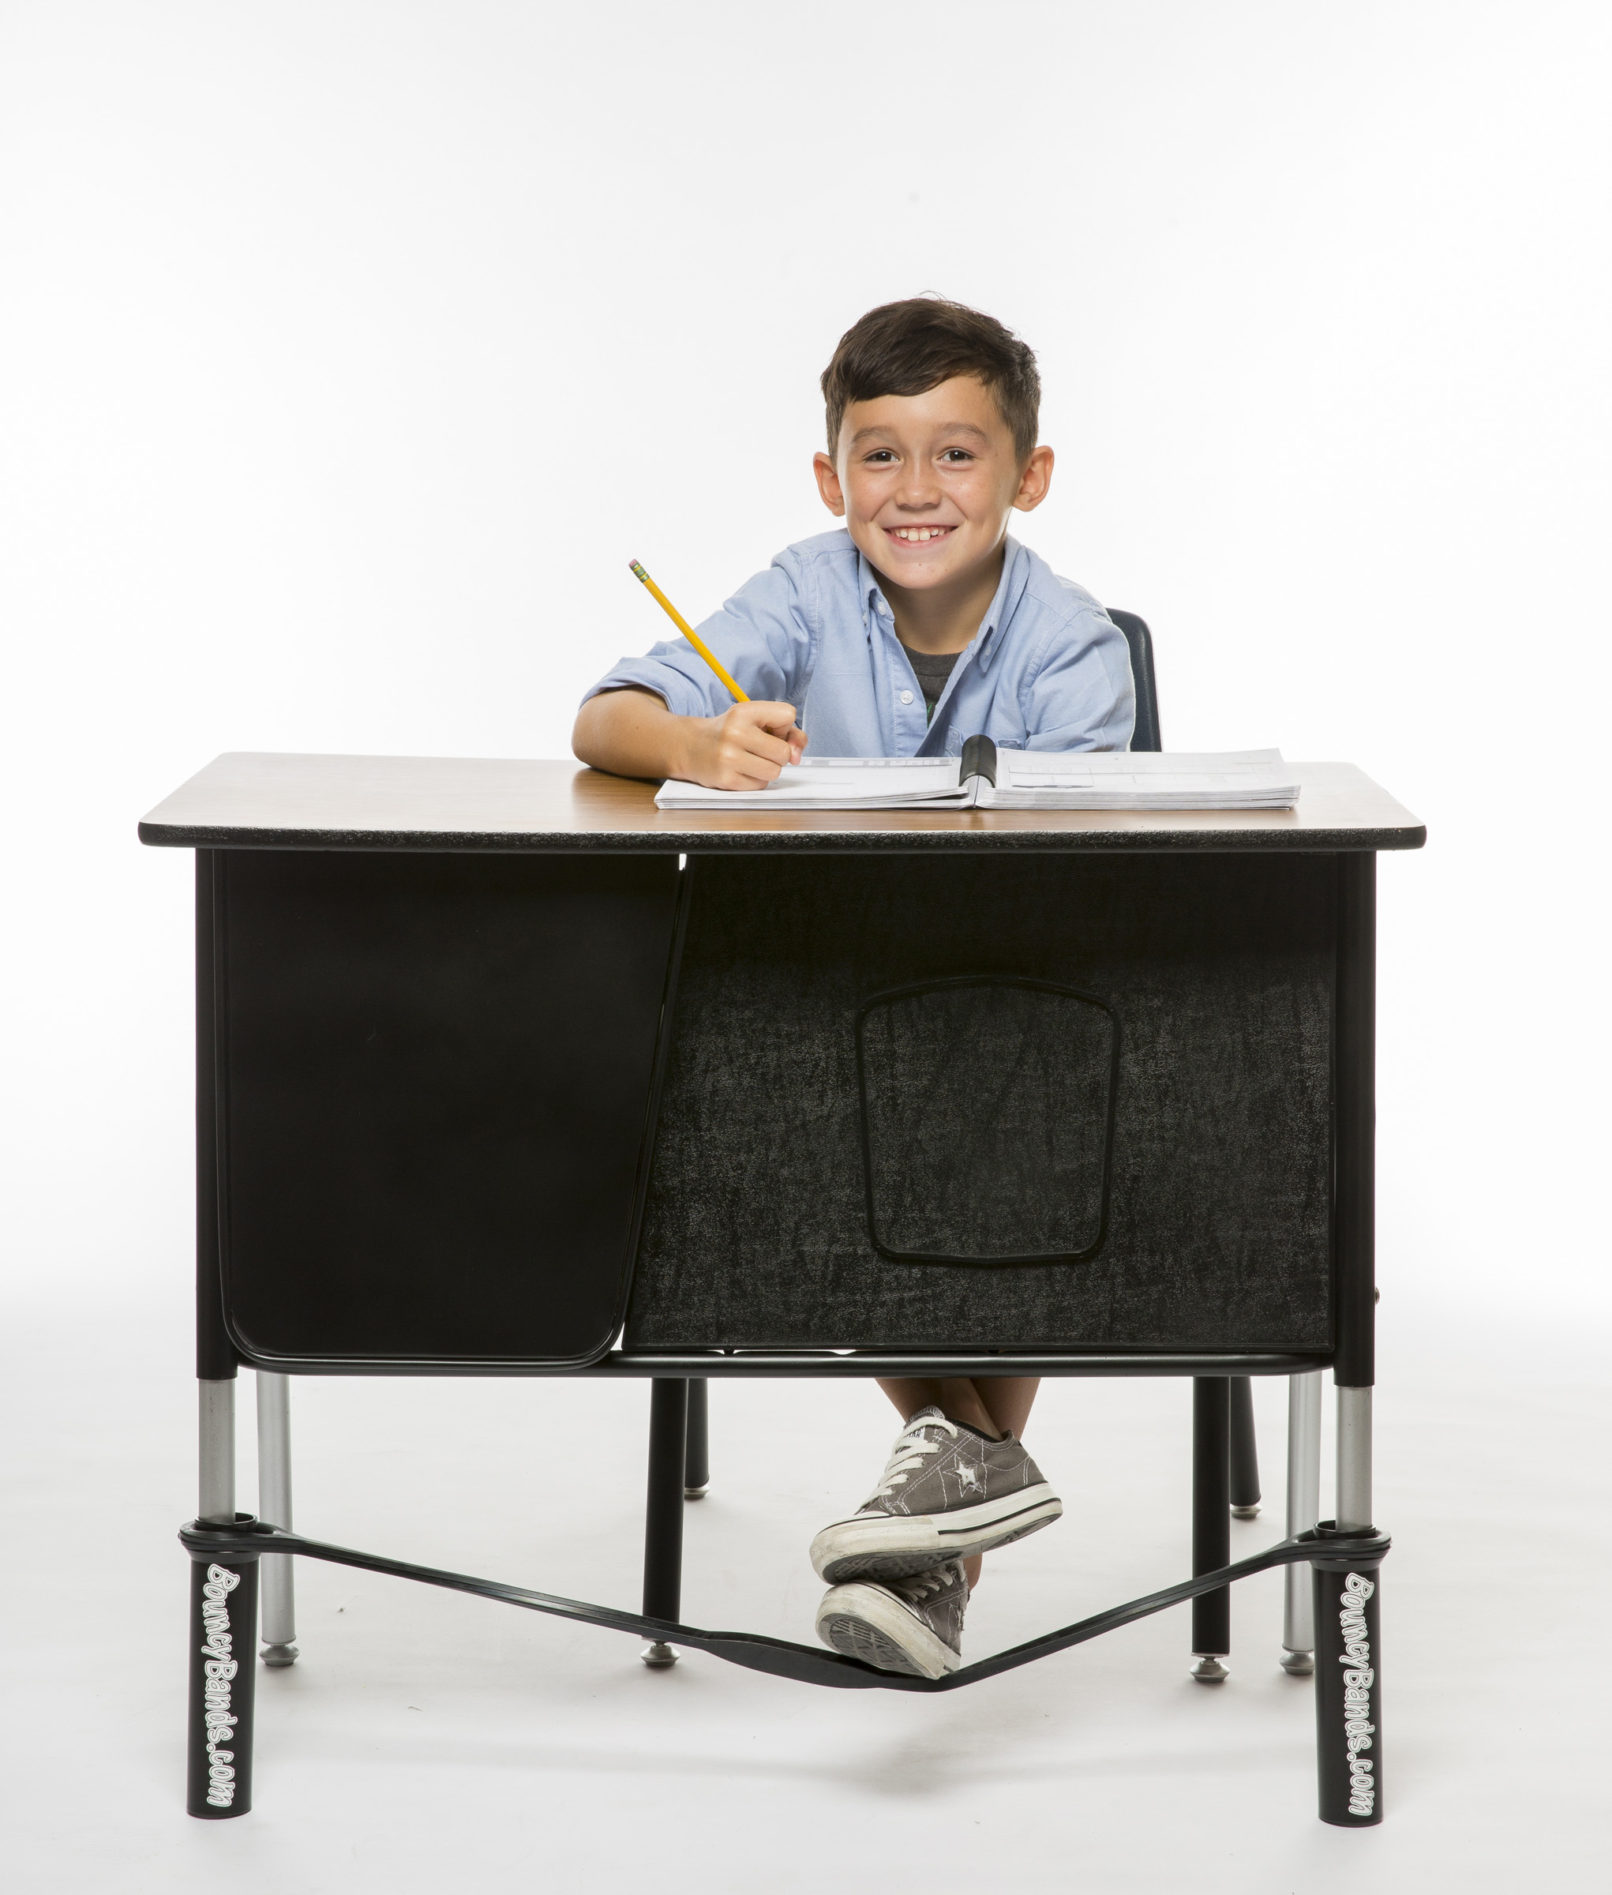 A child at a desk using a bouncy band.